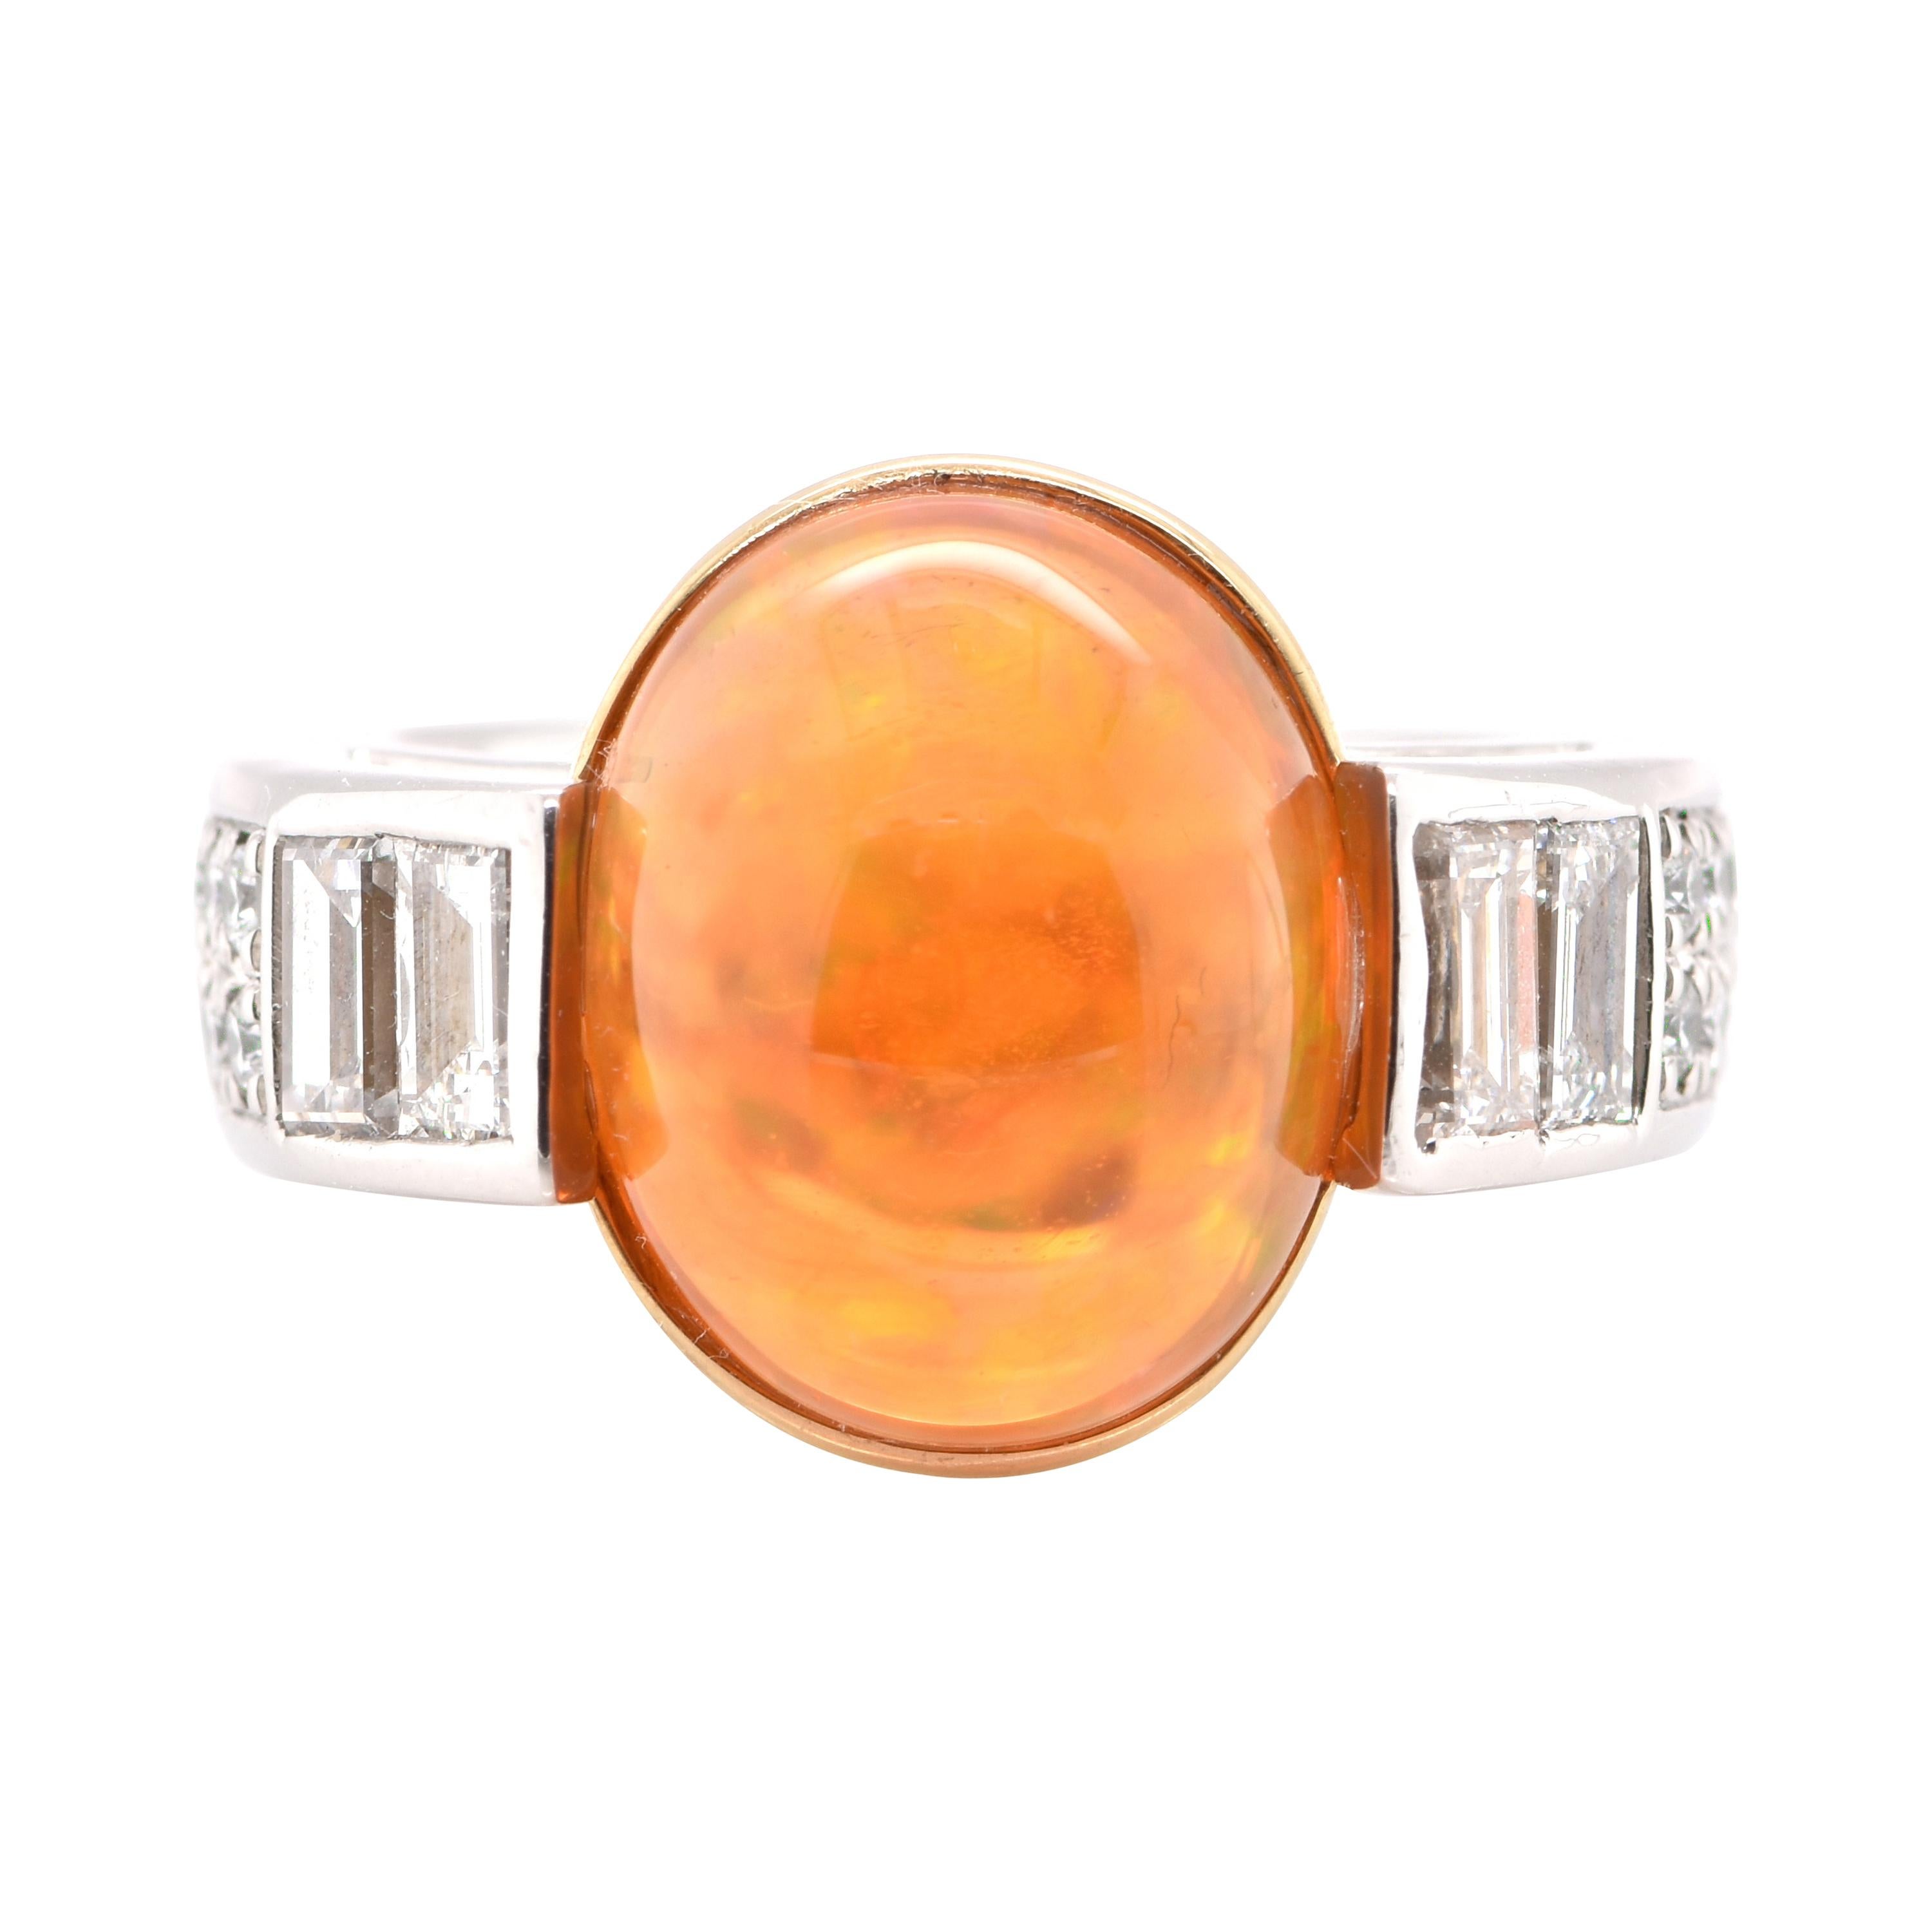 9.03 Carat, Natural Fire Opal and Diamond Cocktail Ring Set in Platinum and 18k